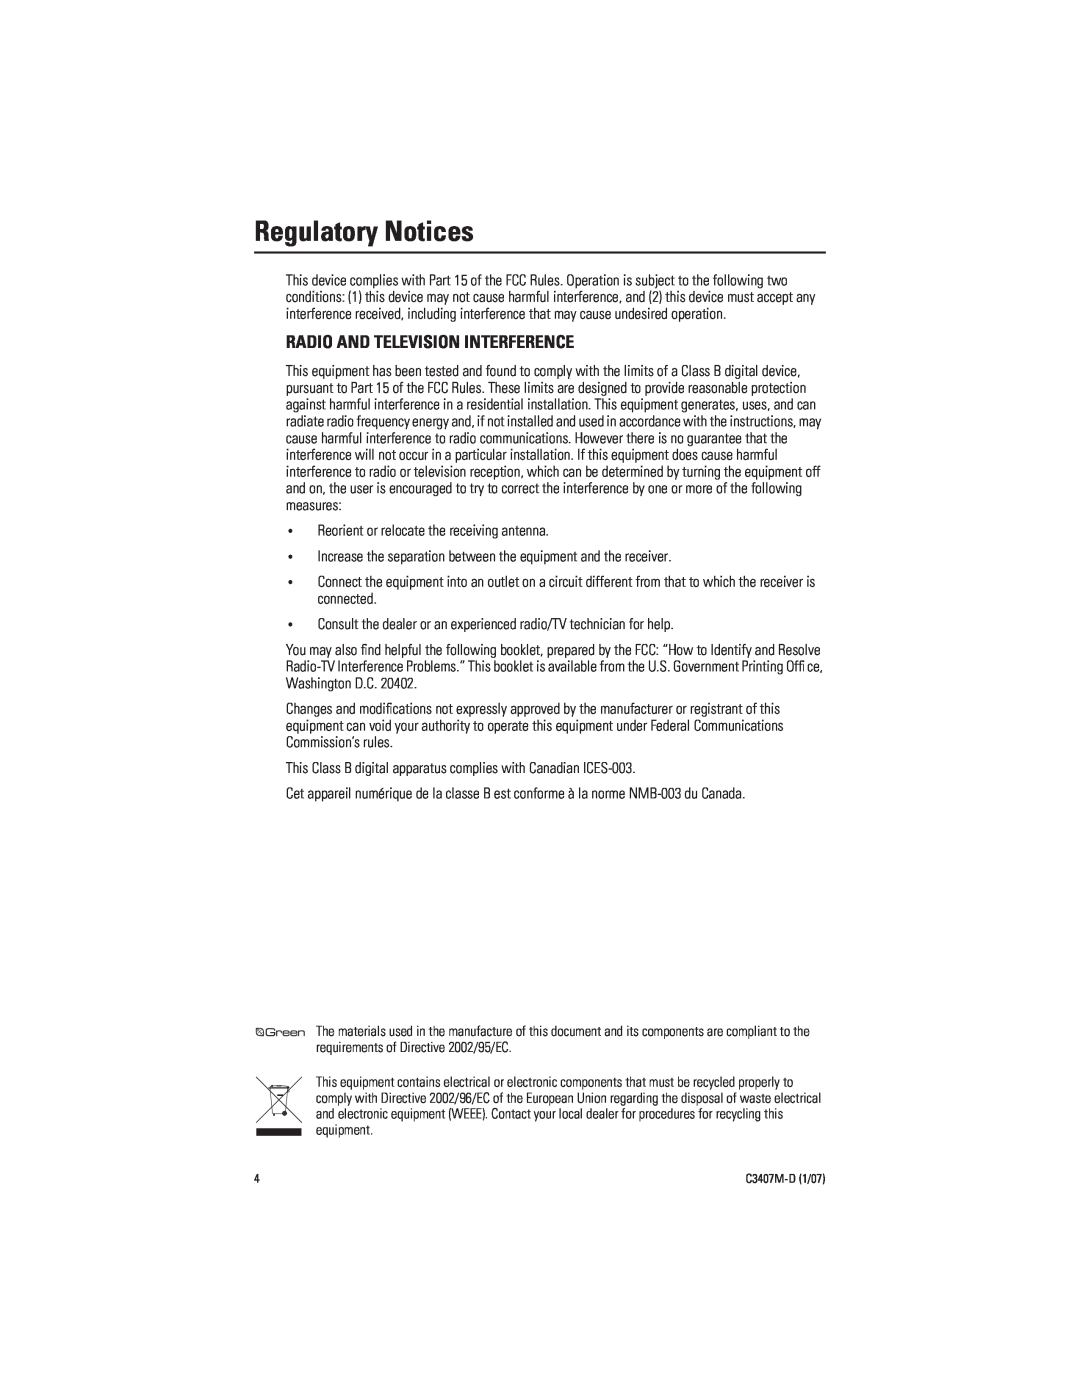 Pelco C3407M-D manual Regulatory Notices, Radio And Television Interference 